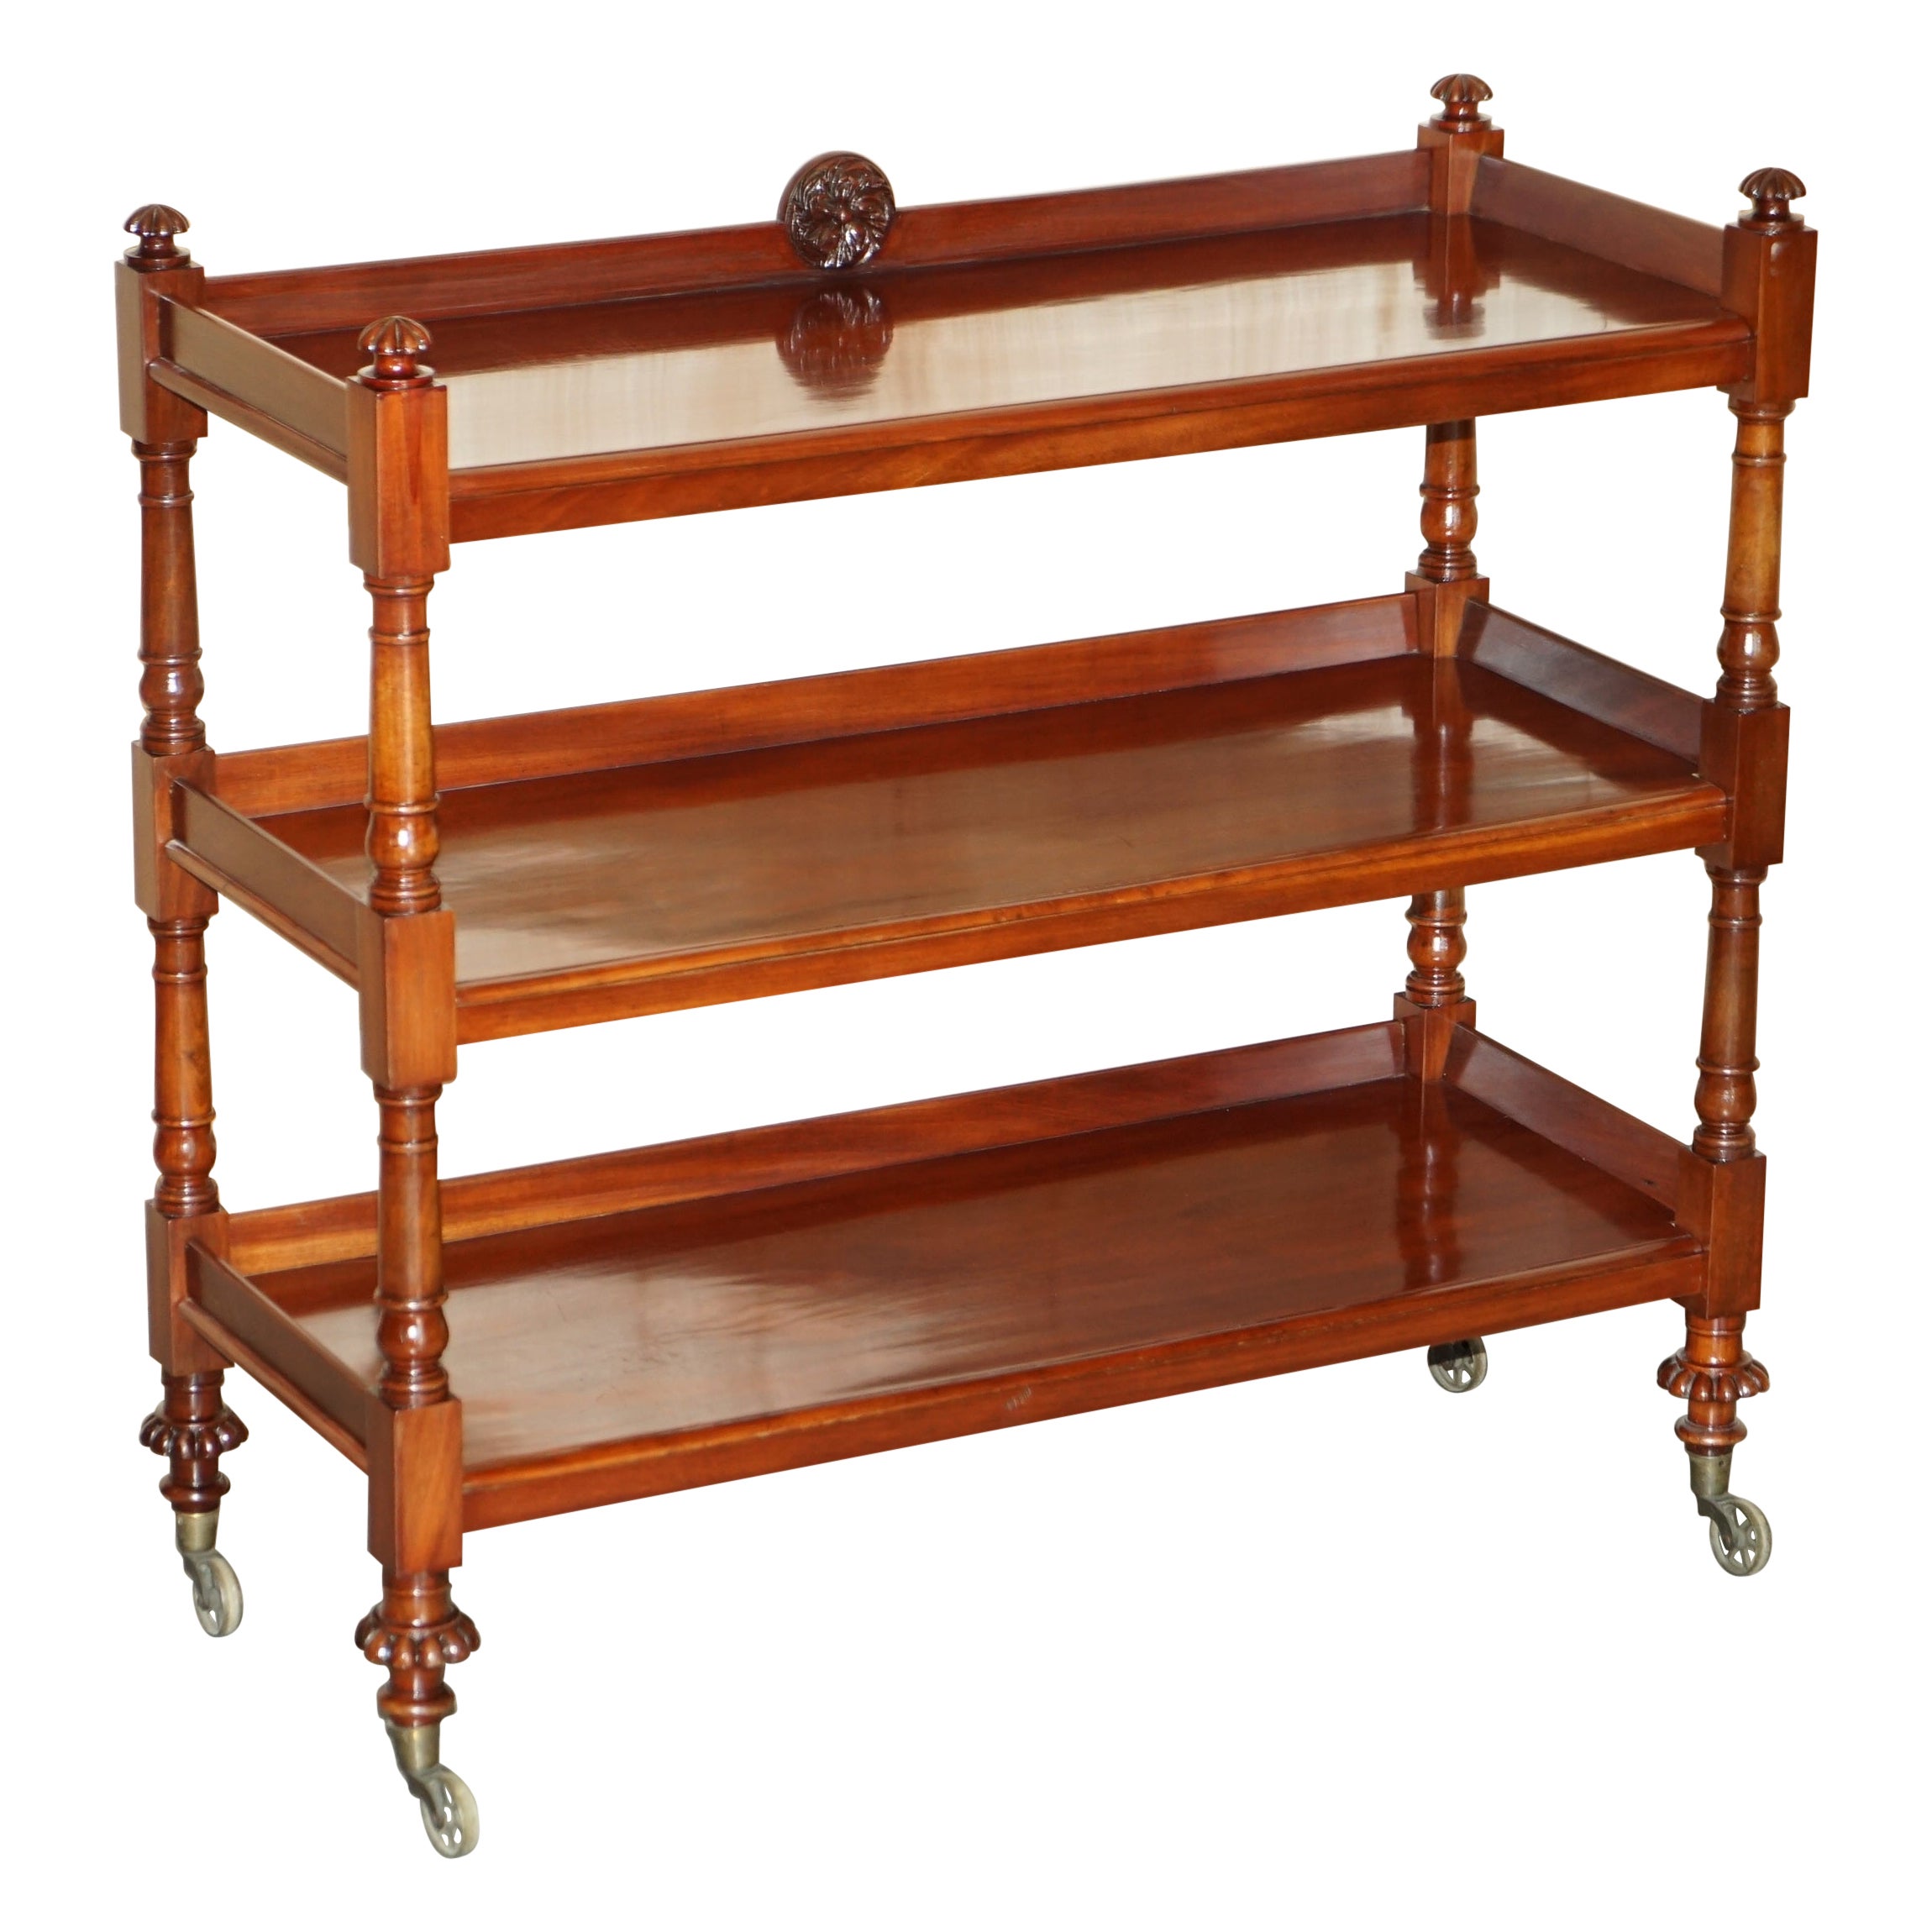 Antique circa 1840 English Hardwood Three Tier Bookcase Trolly After Gillows For Sale